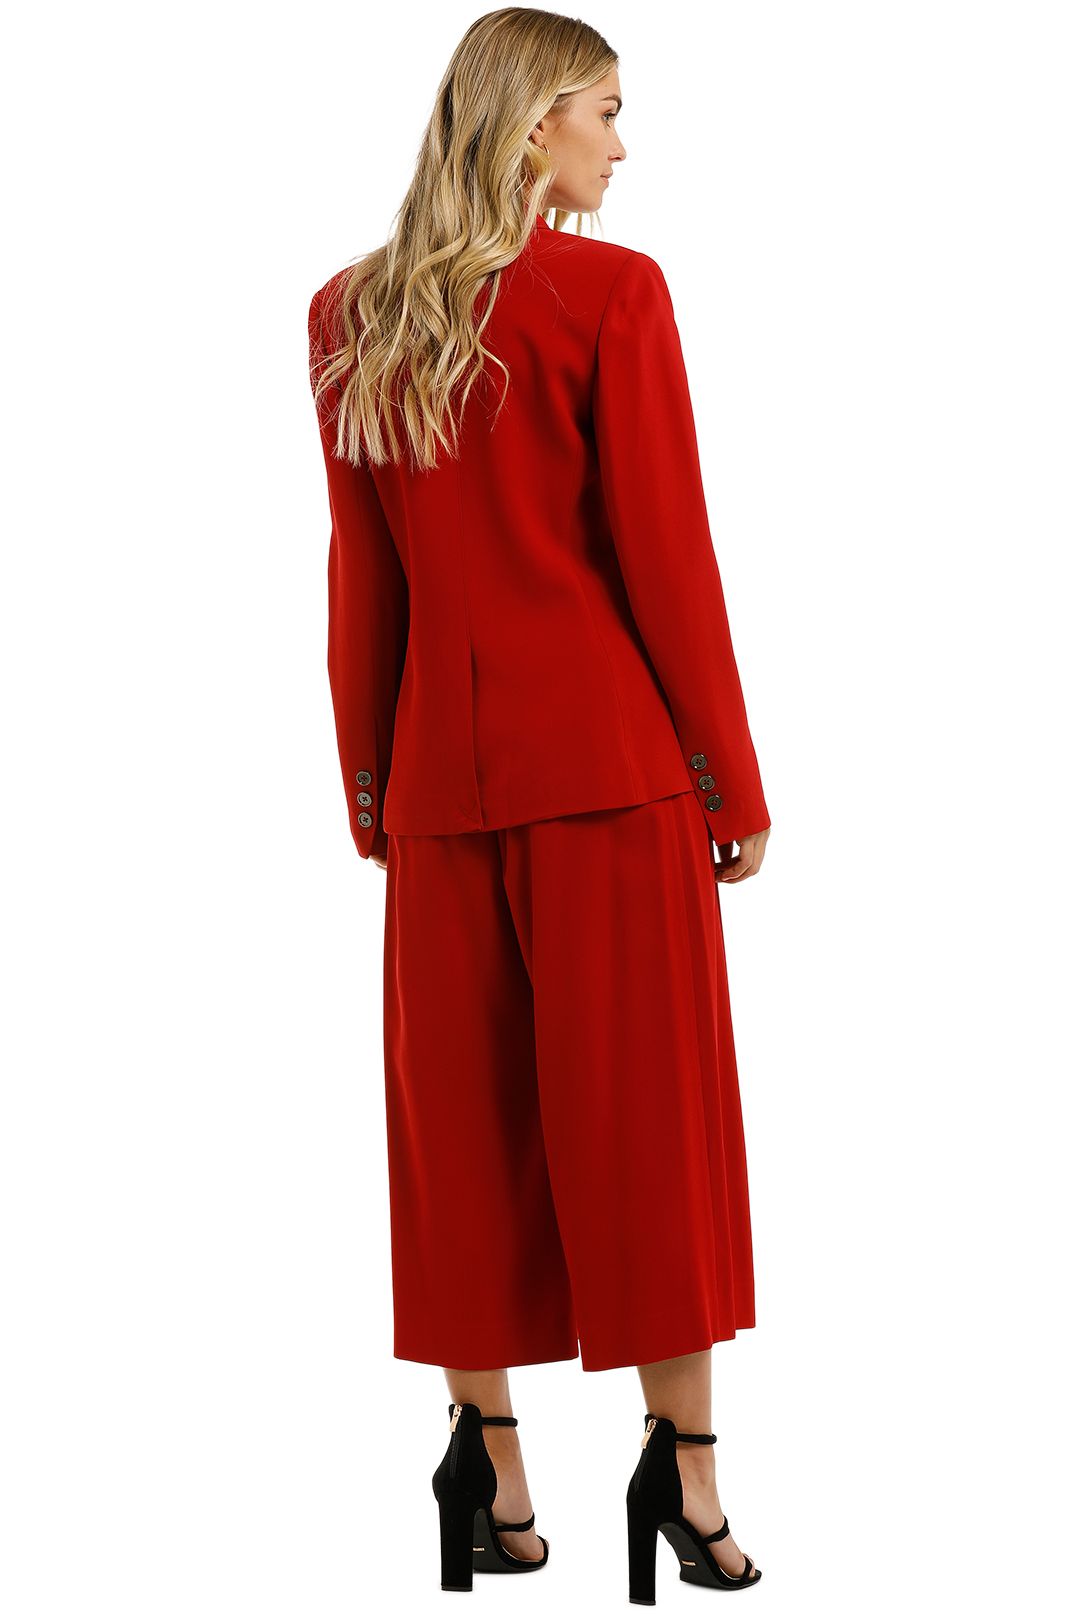 Ginger-and-Smart-Equinox-Jacket-and-Pant-Set-Scarlet-Red-Back